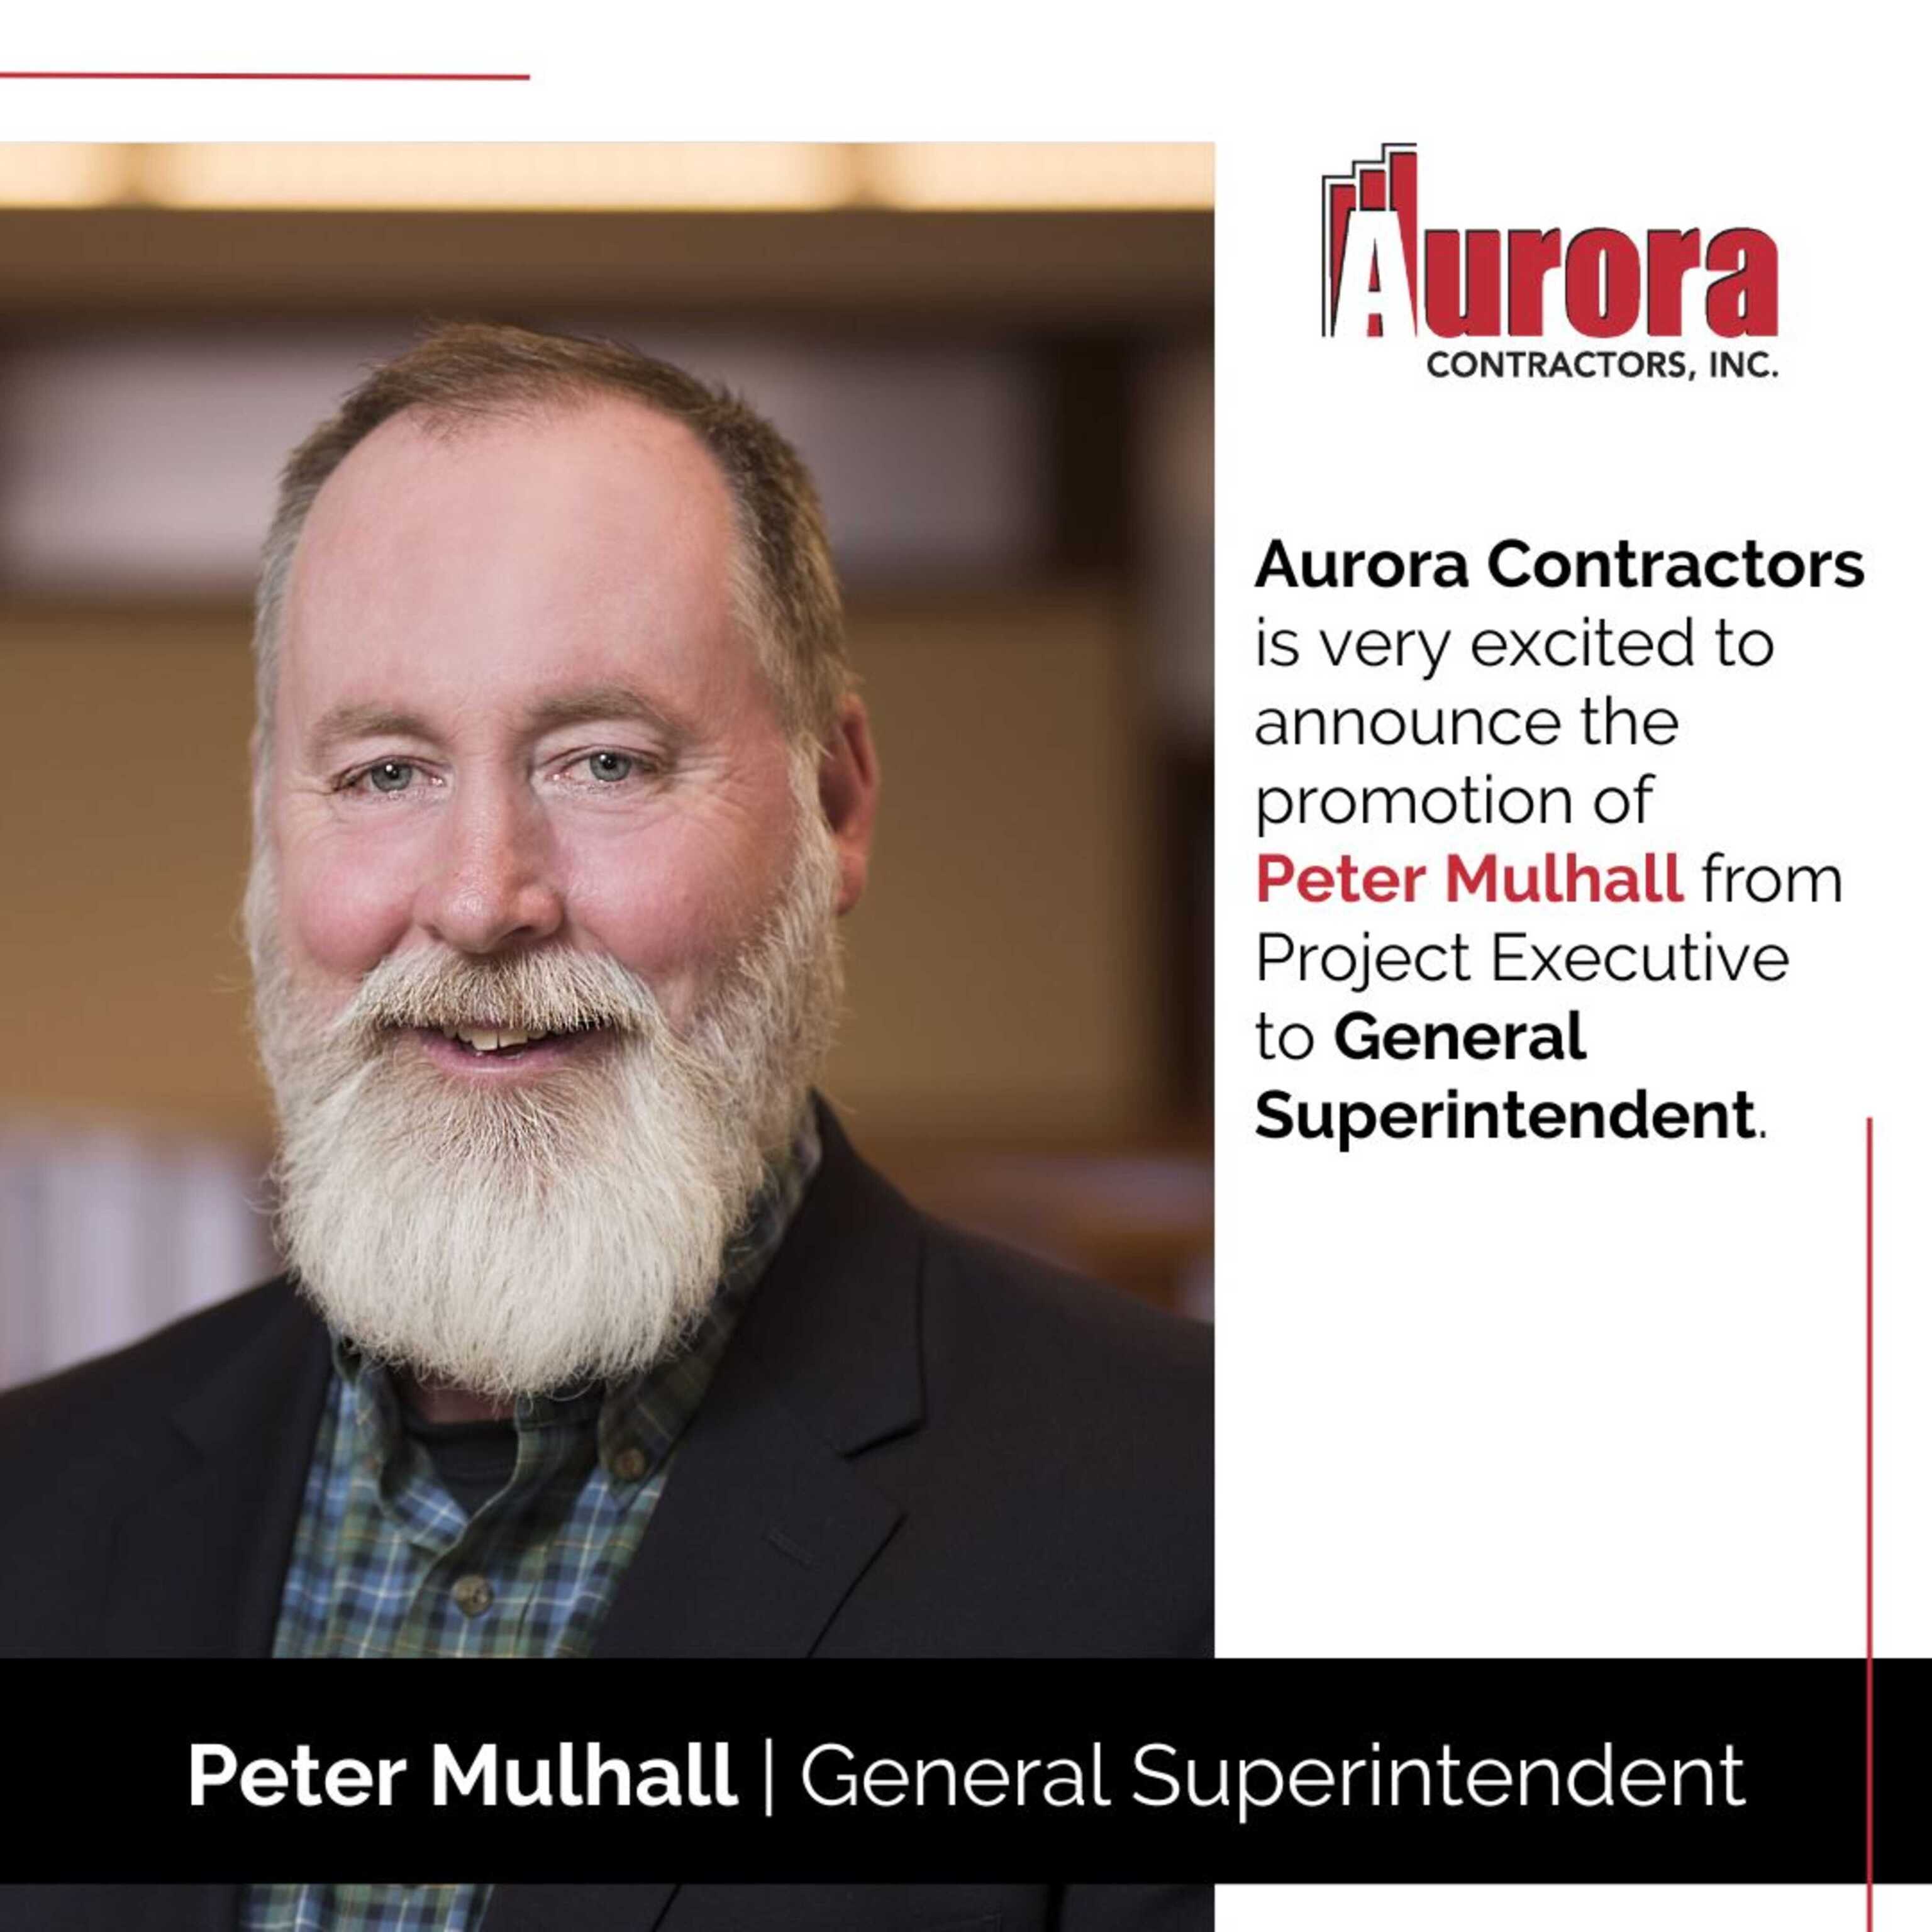 Peter Mulhall Promotion to General Superintendent